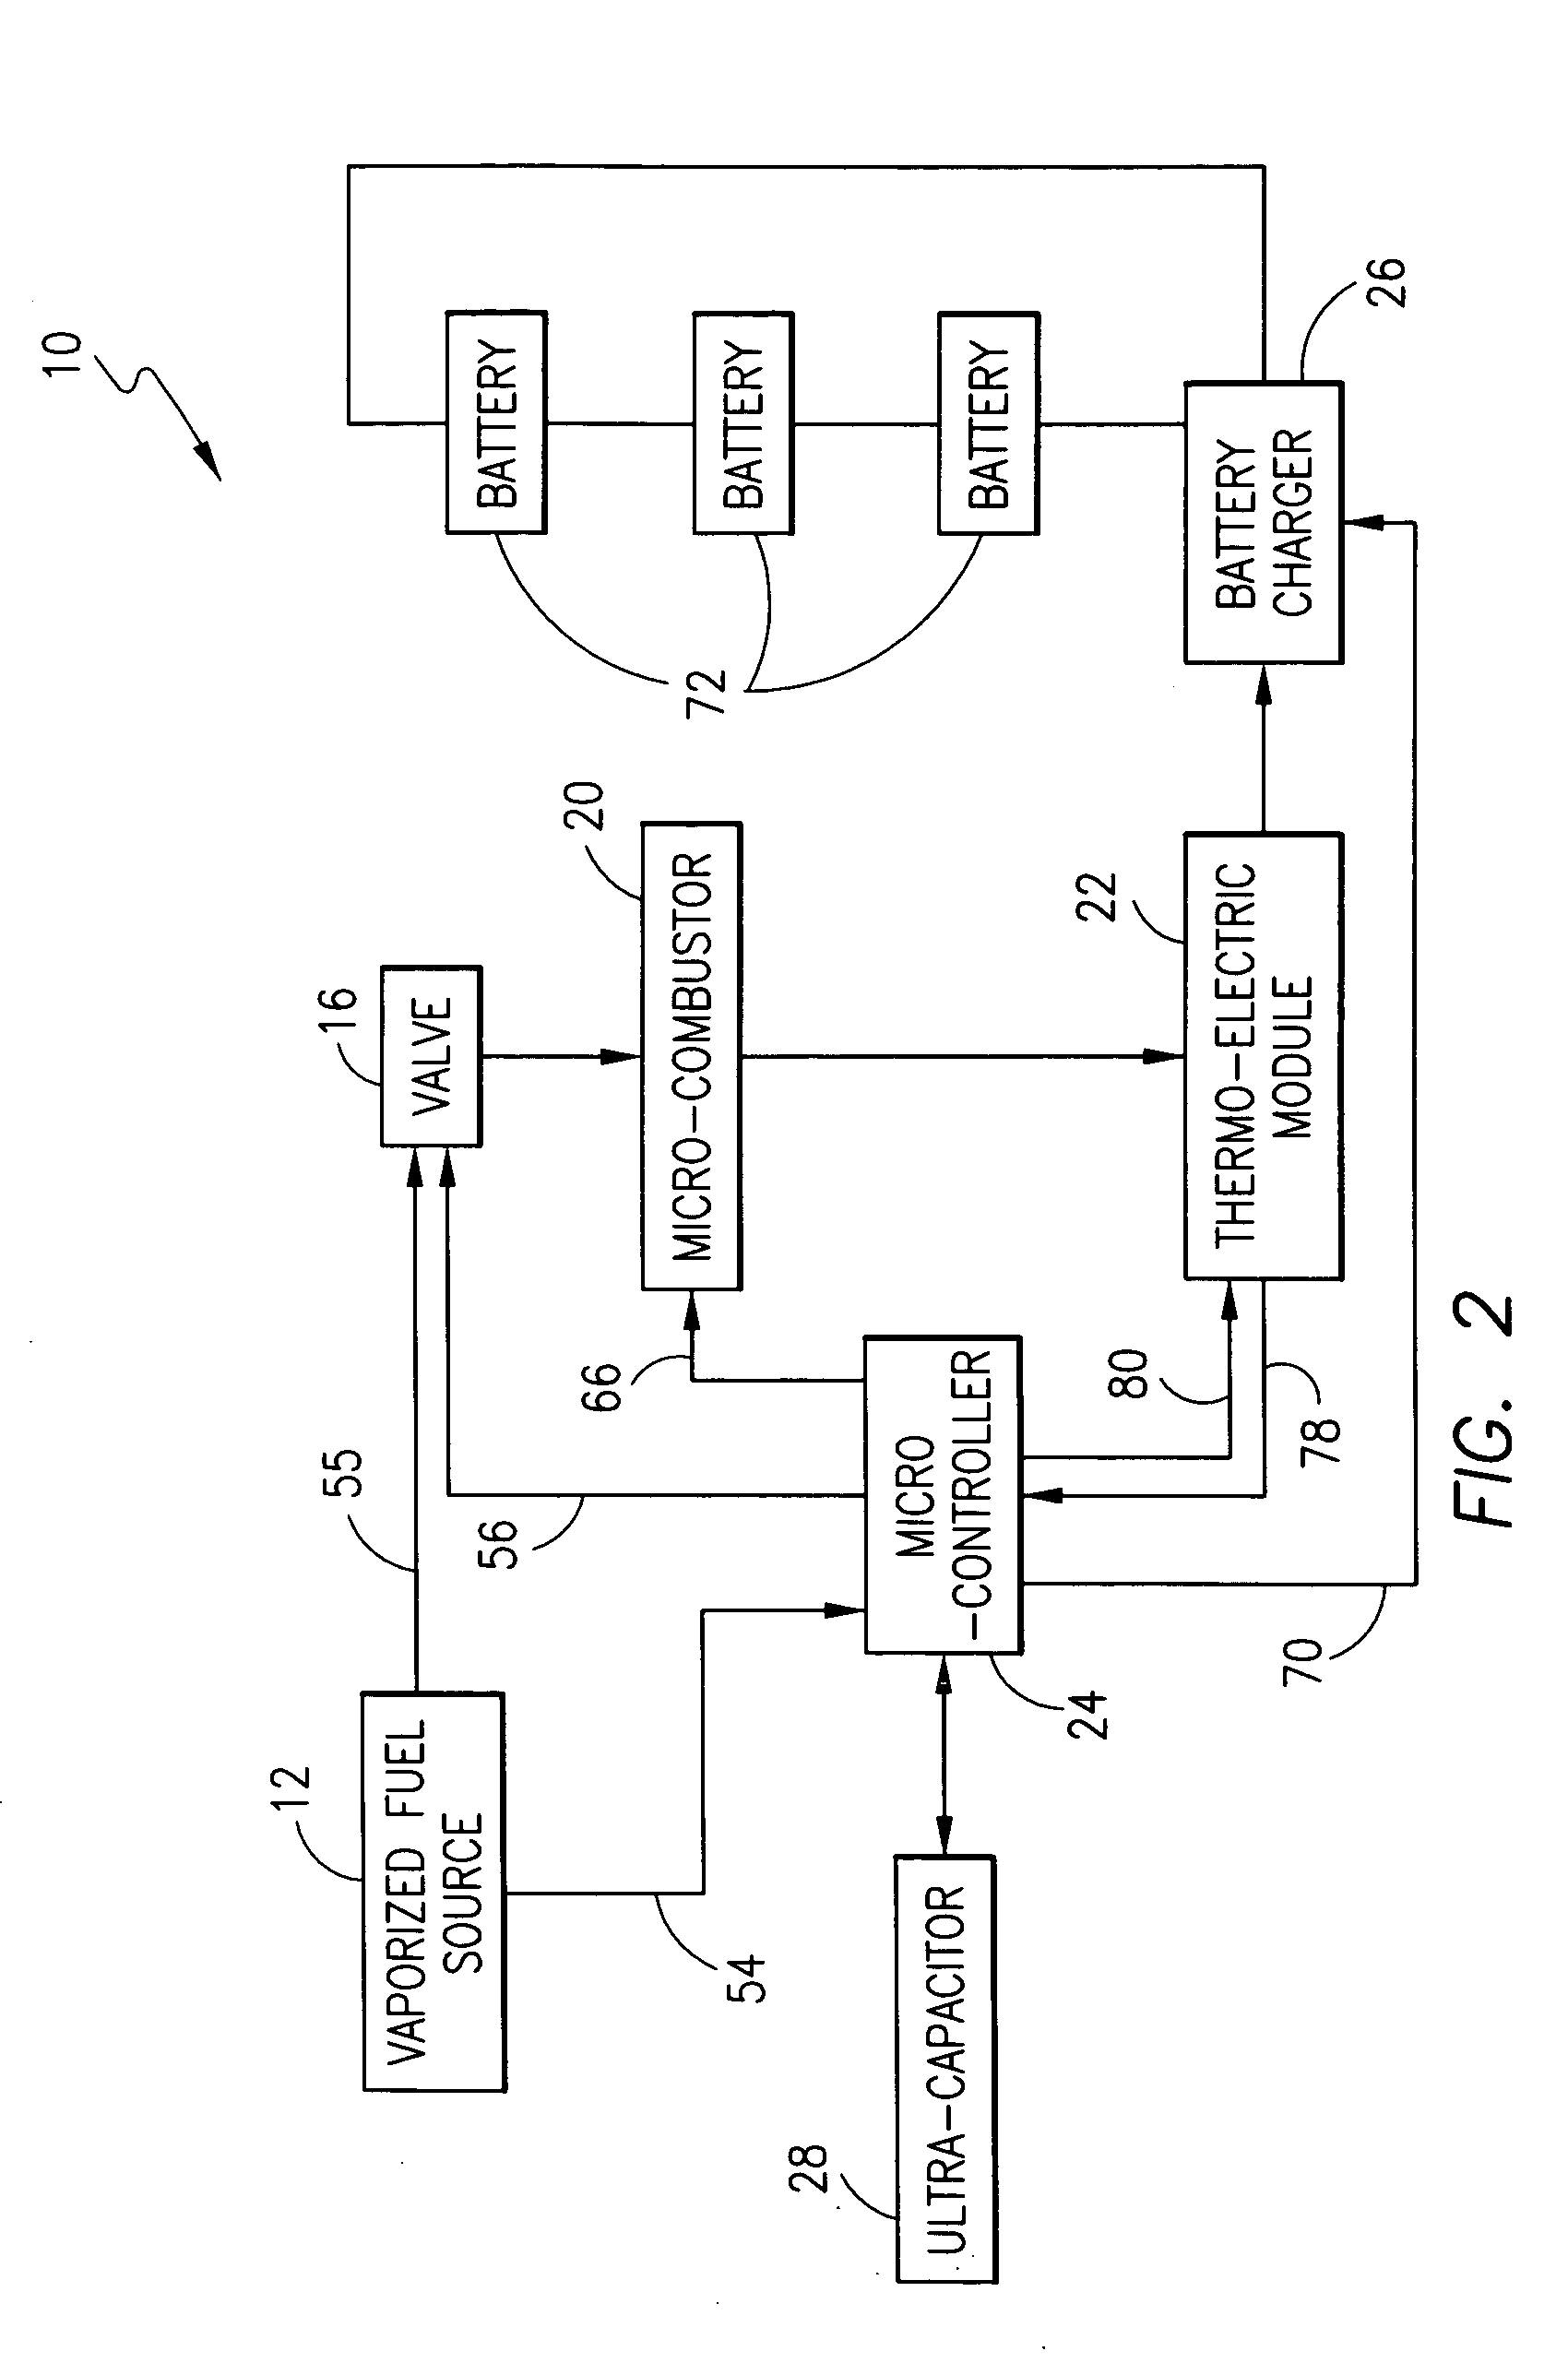 Fuel flexible thermoelectric generator with battery charger